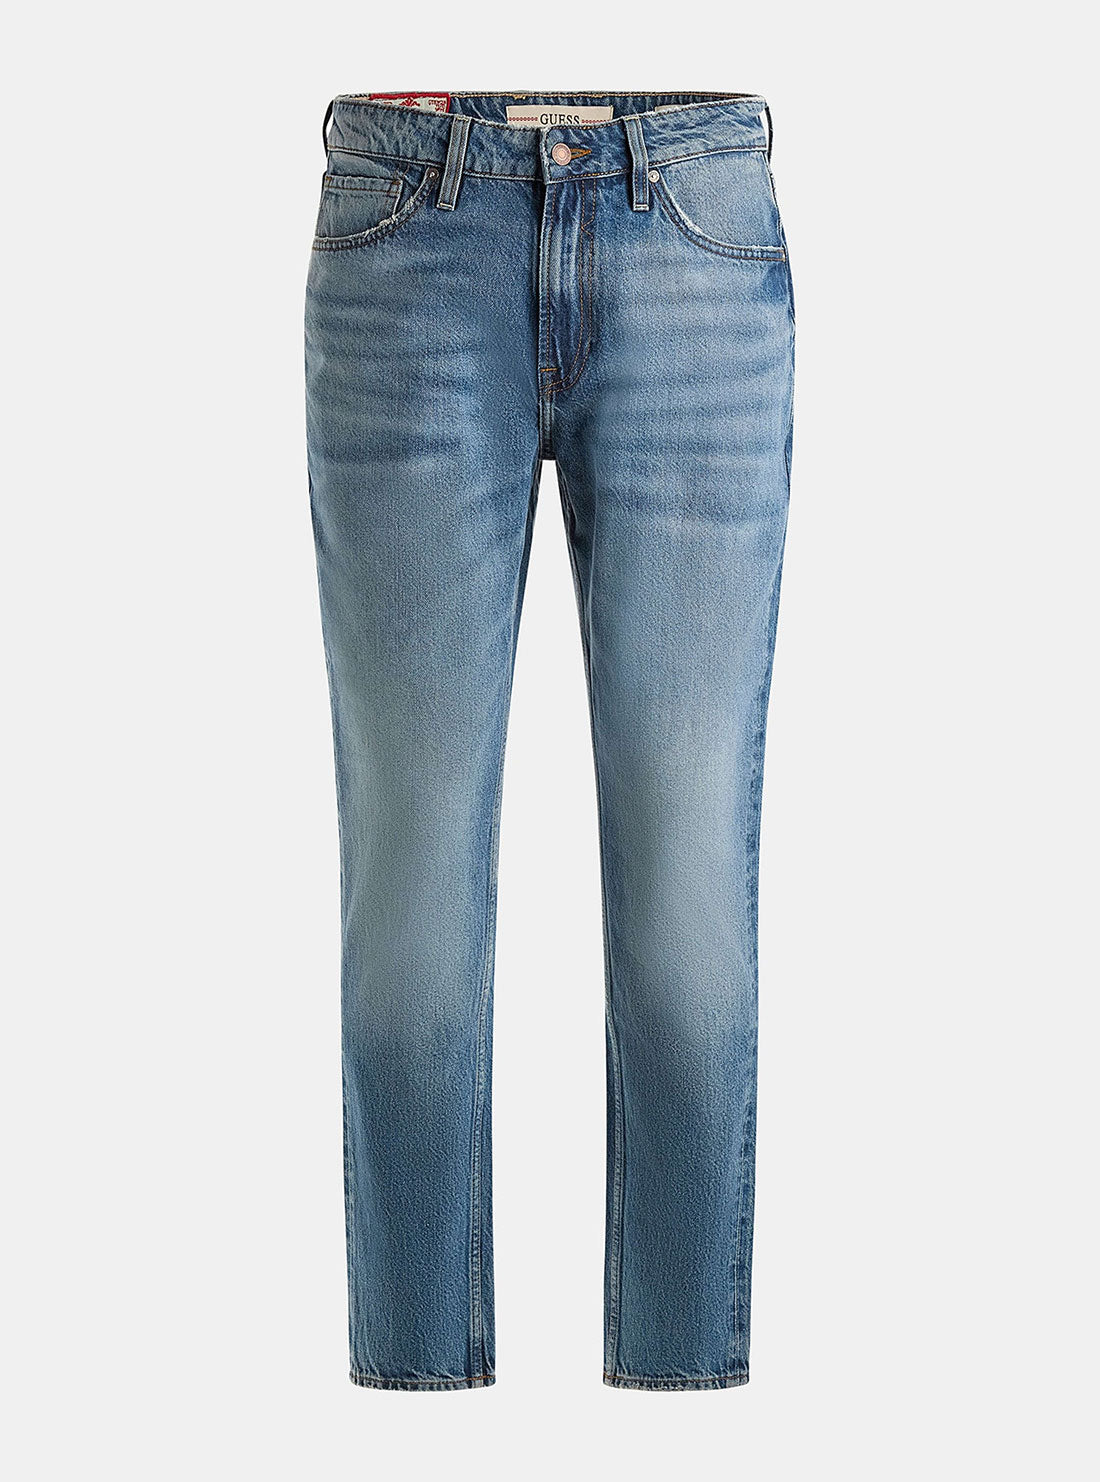 GUESS Men's Eco Mid-Rise Tapered Drake Denim Jeans In The Blazer Wash M3RA37D4T9C Ghost View